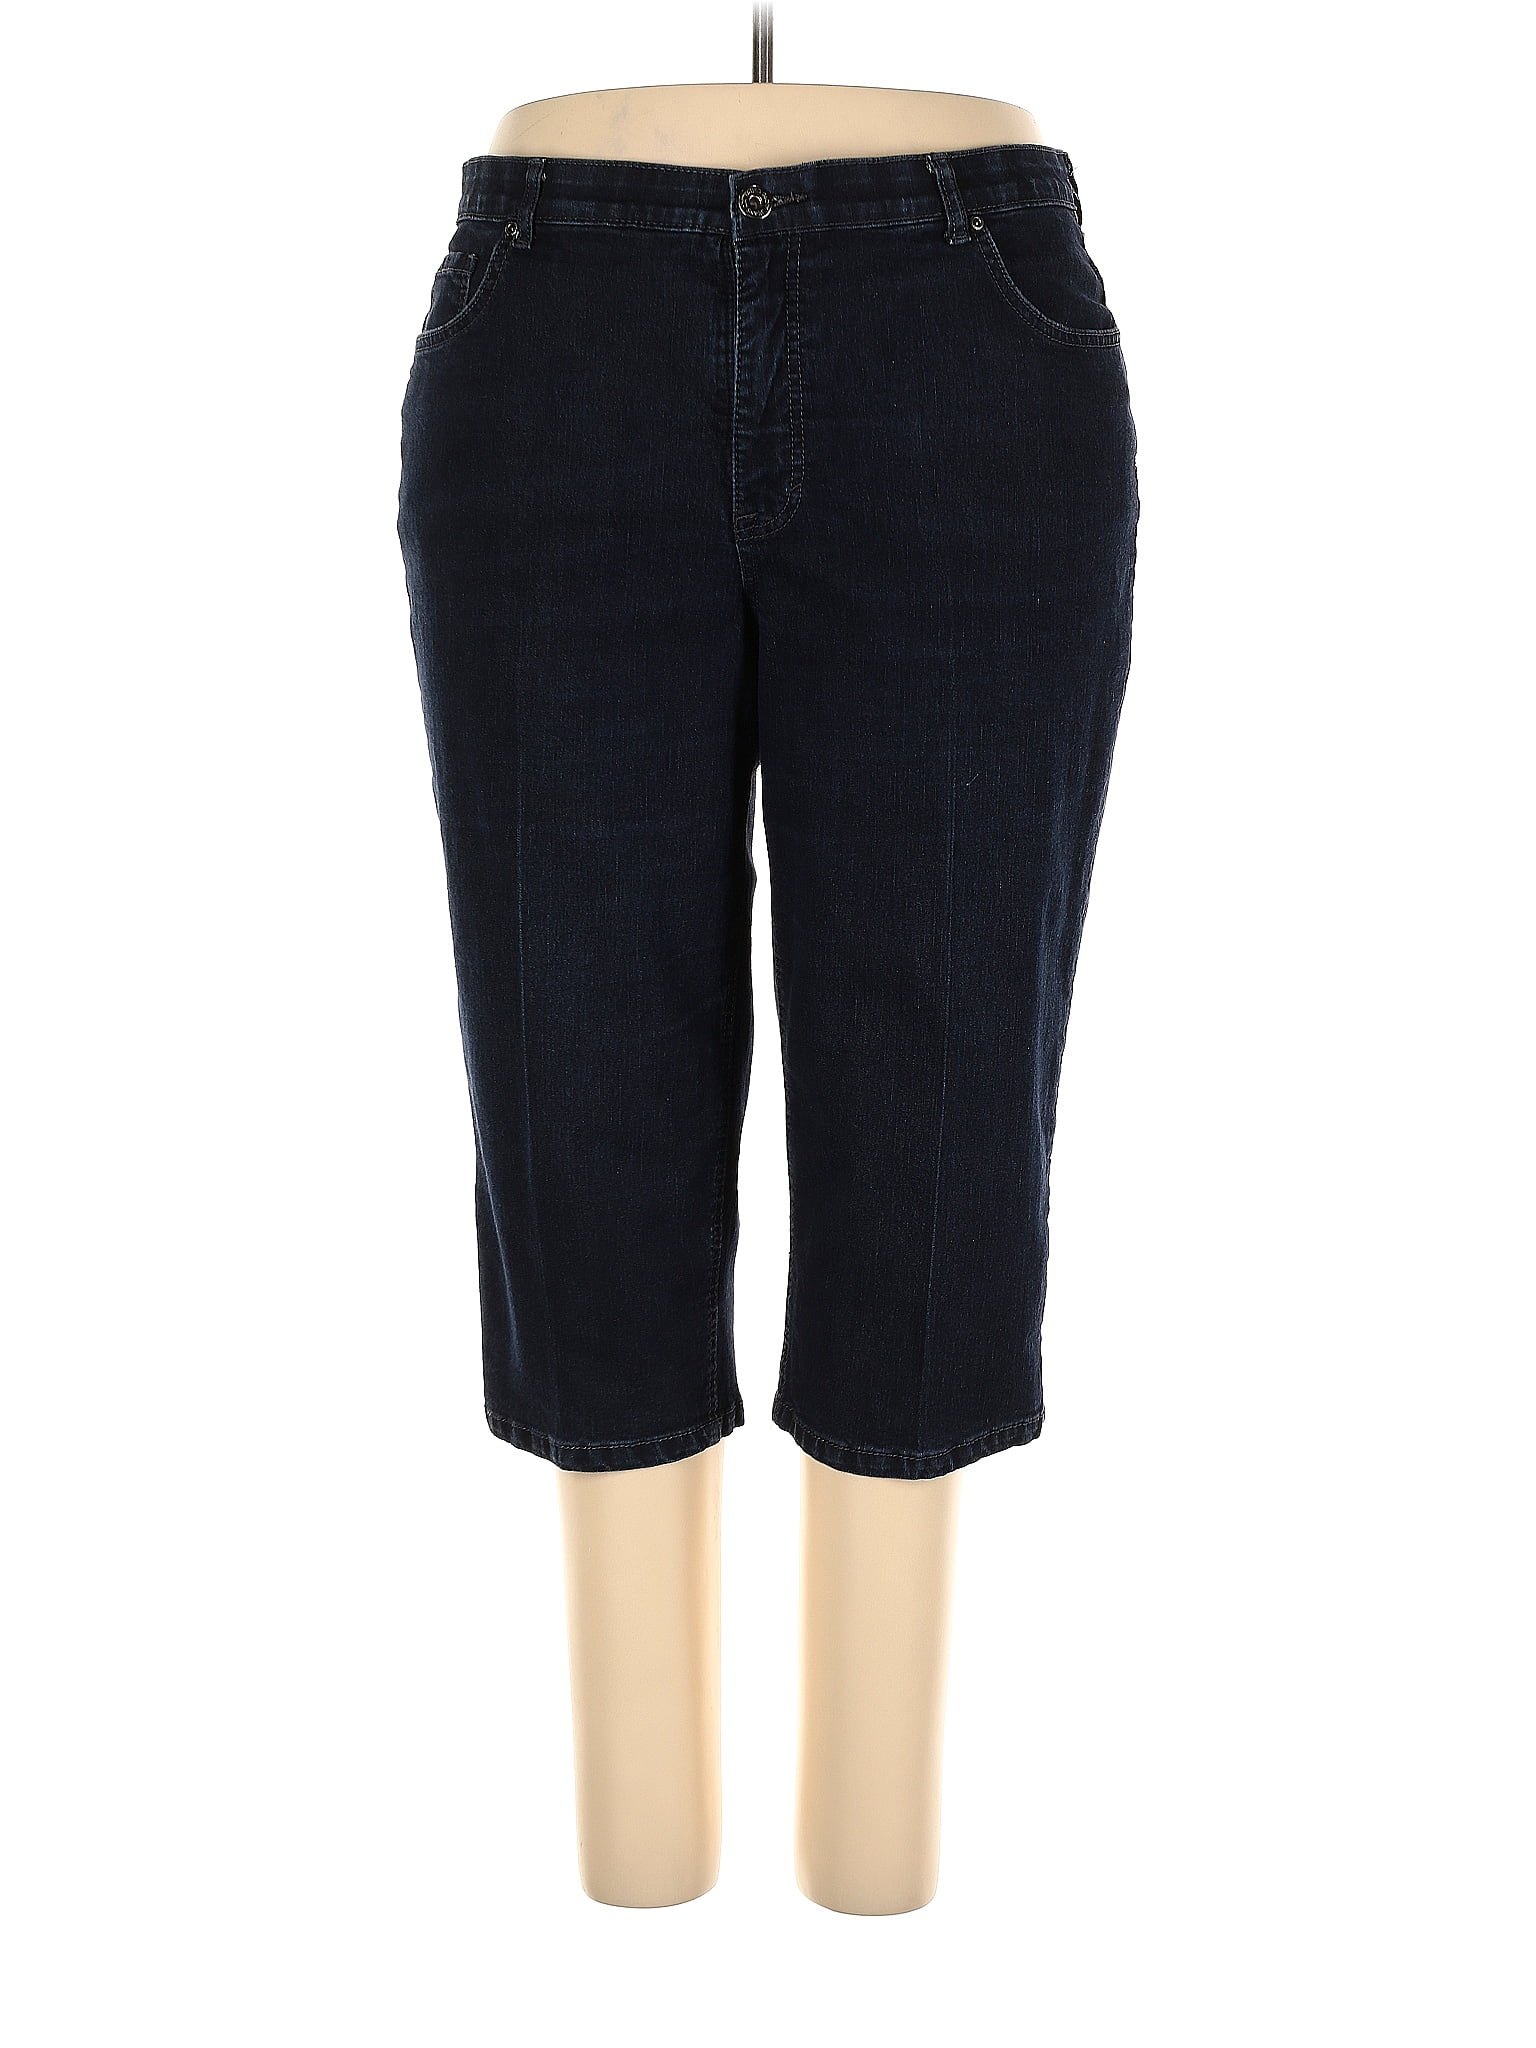 Jeans Straight By Faded Glory Size: 2x